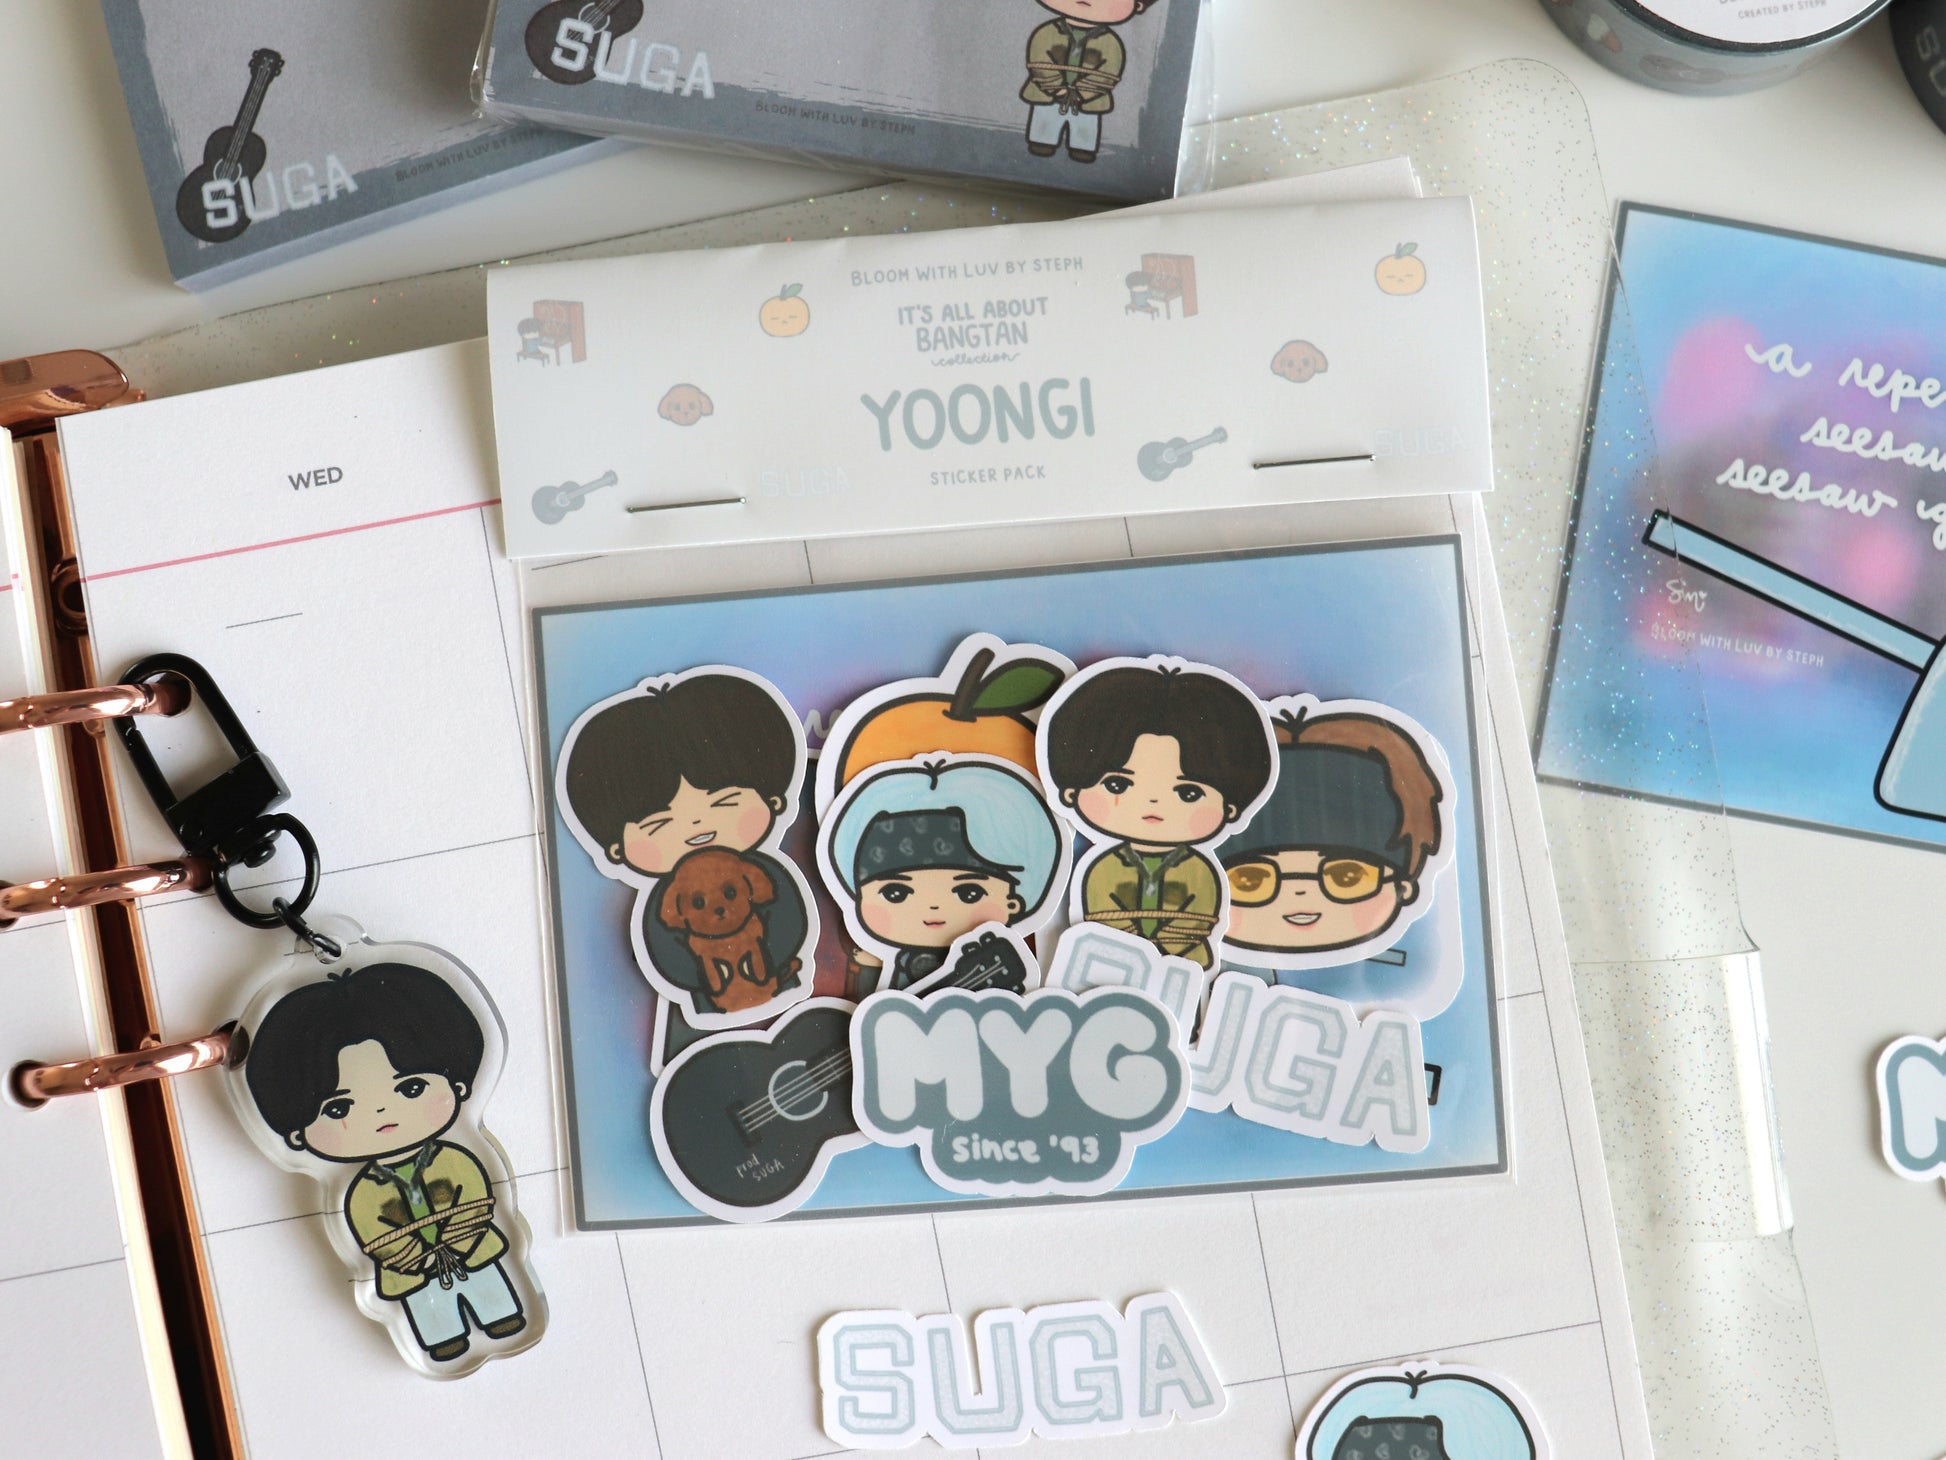 It's All About Yoongi - Sticker Pack - [It's All About Bangtan